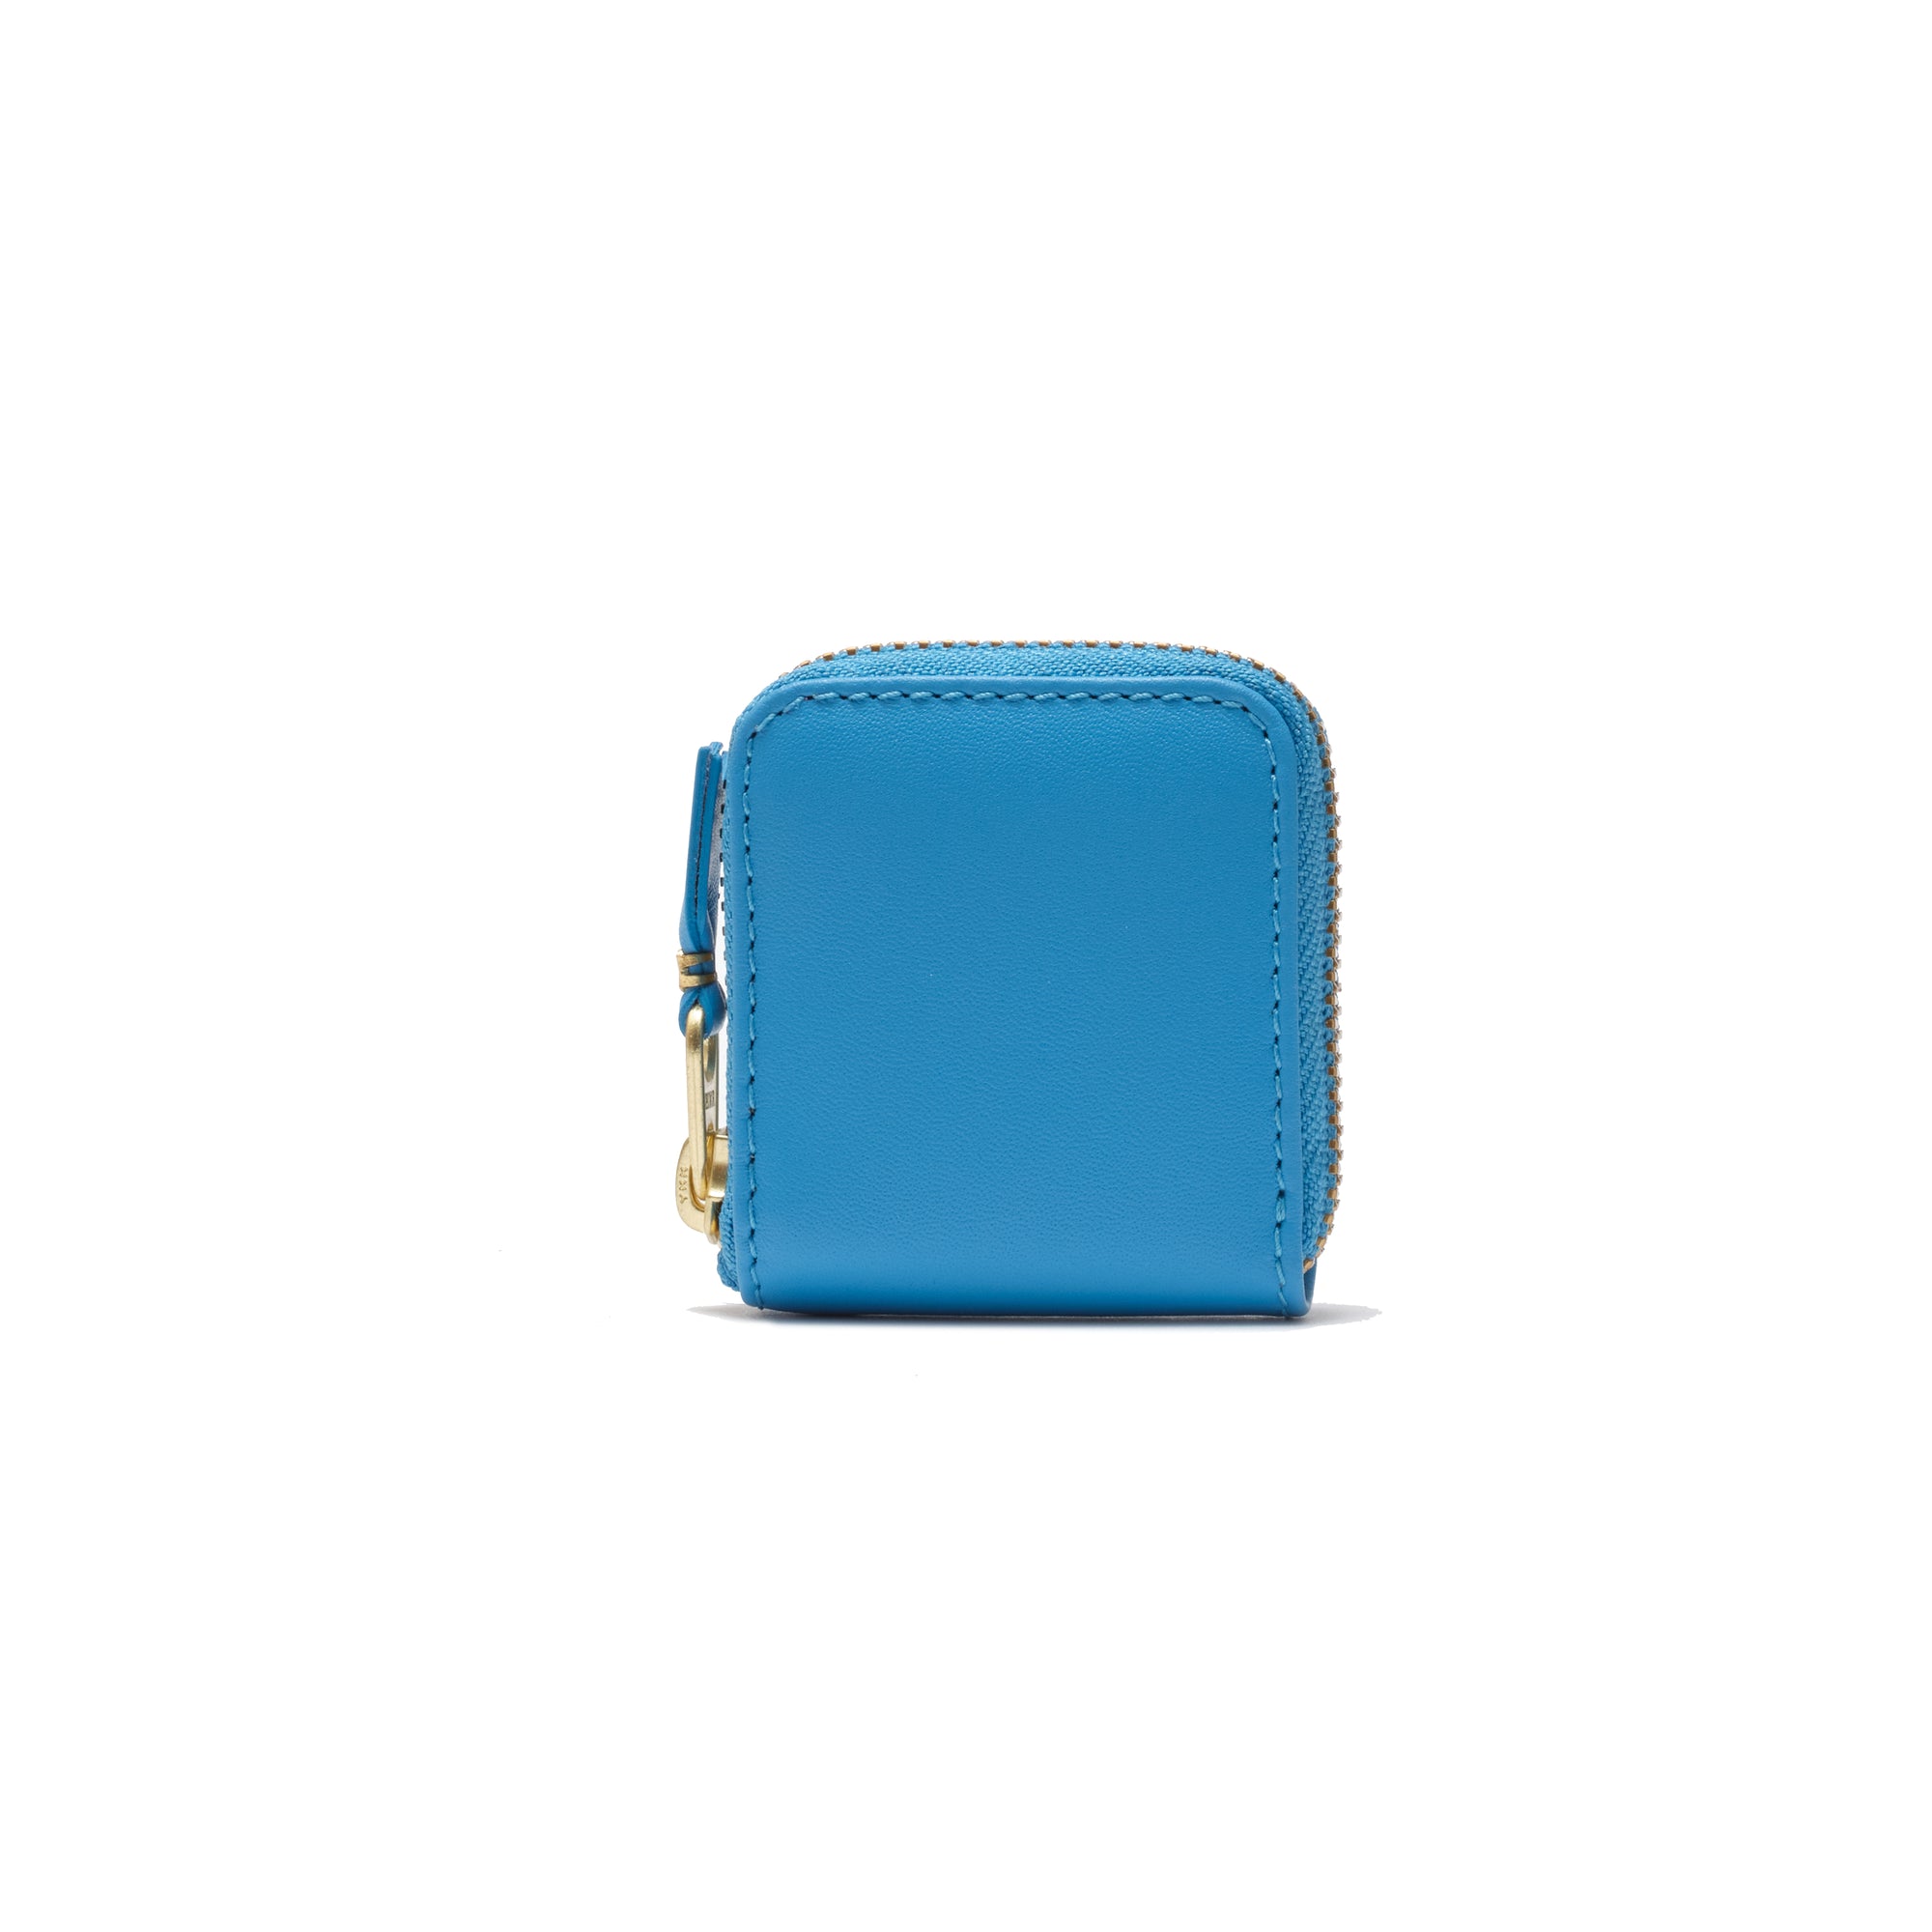 CDG WALLET - Colored Leather Line-8Z-A041 - (Blue) view 1